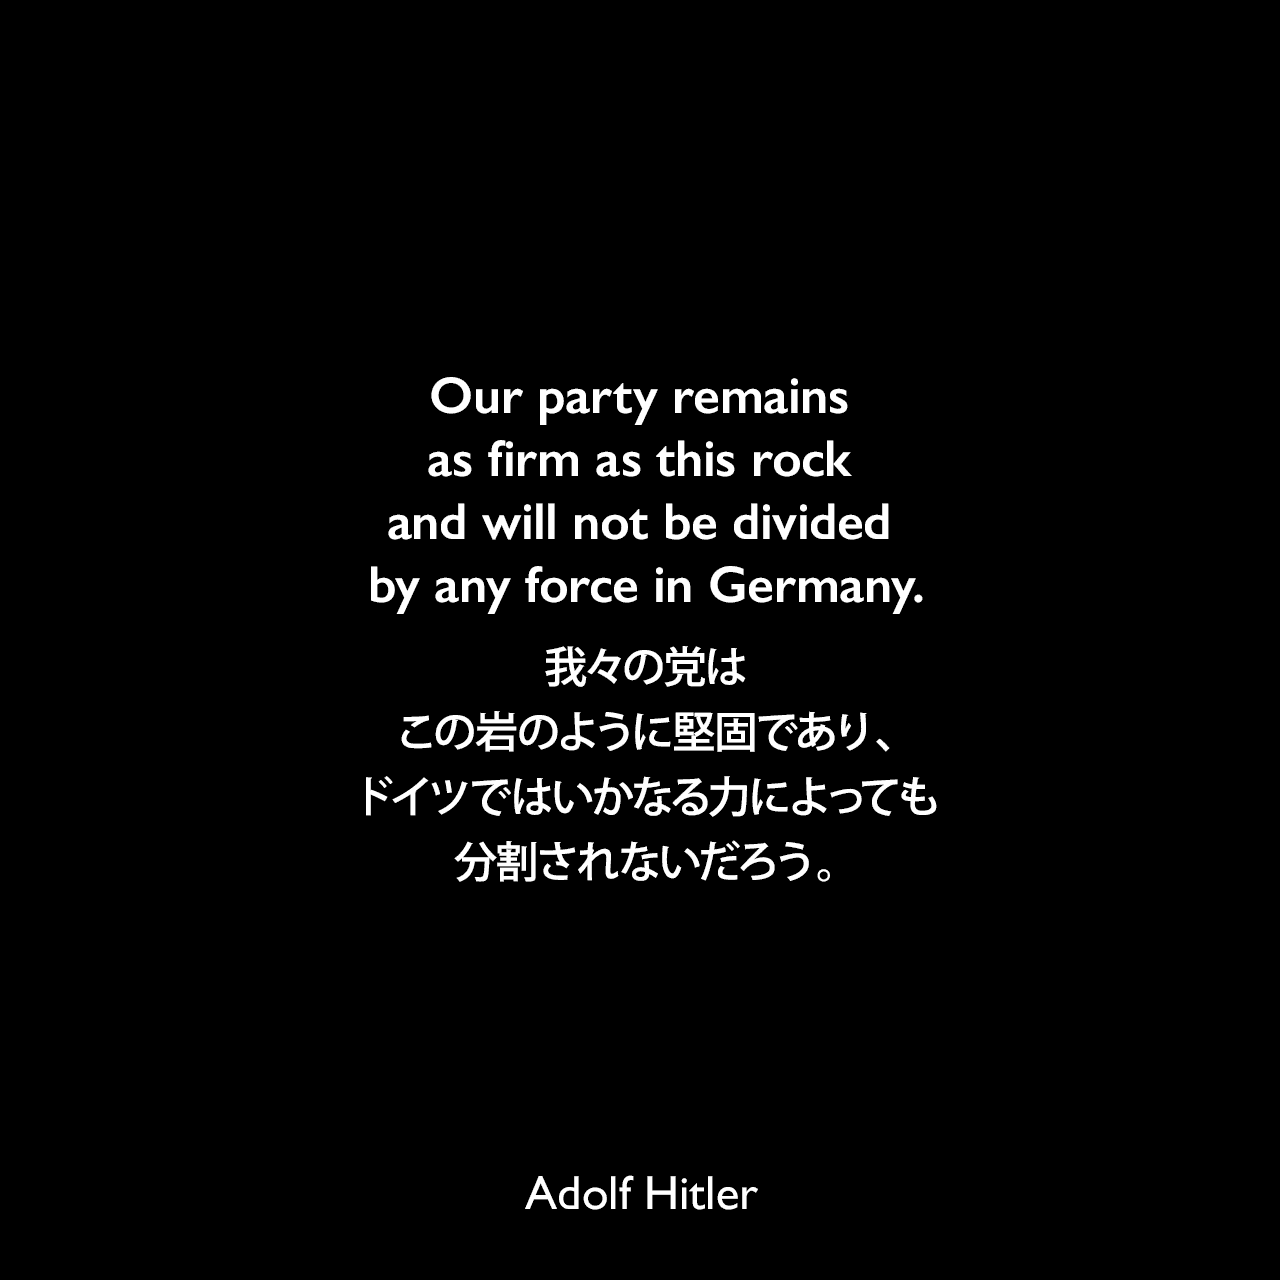 Our party remains as firm as this rock and will not be divided by any force in Germany.我々の党はこの岩のように堅固であり、ドイツではいかなる力によっても分割されないだろう。- 映画「意志の勝利」よりAdolf Hitler